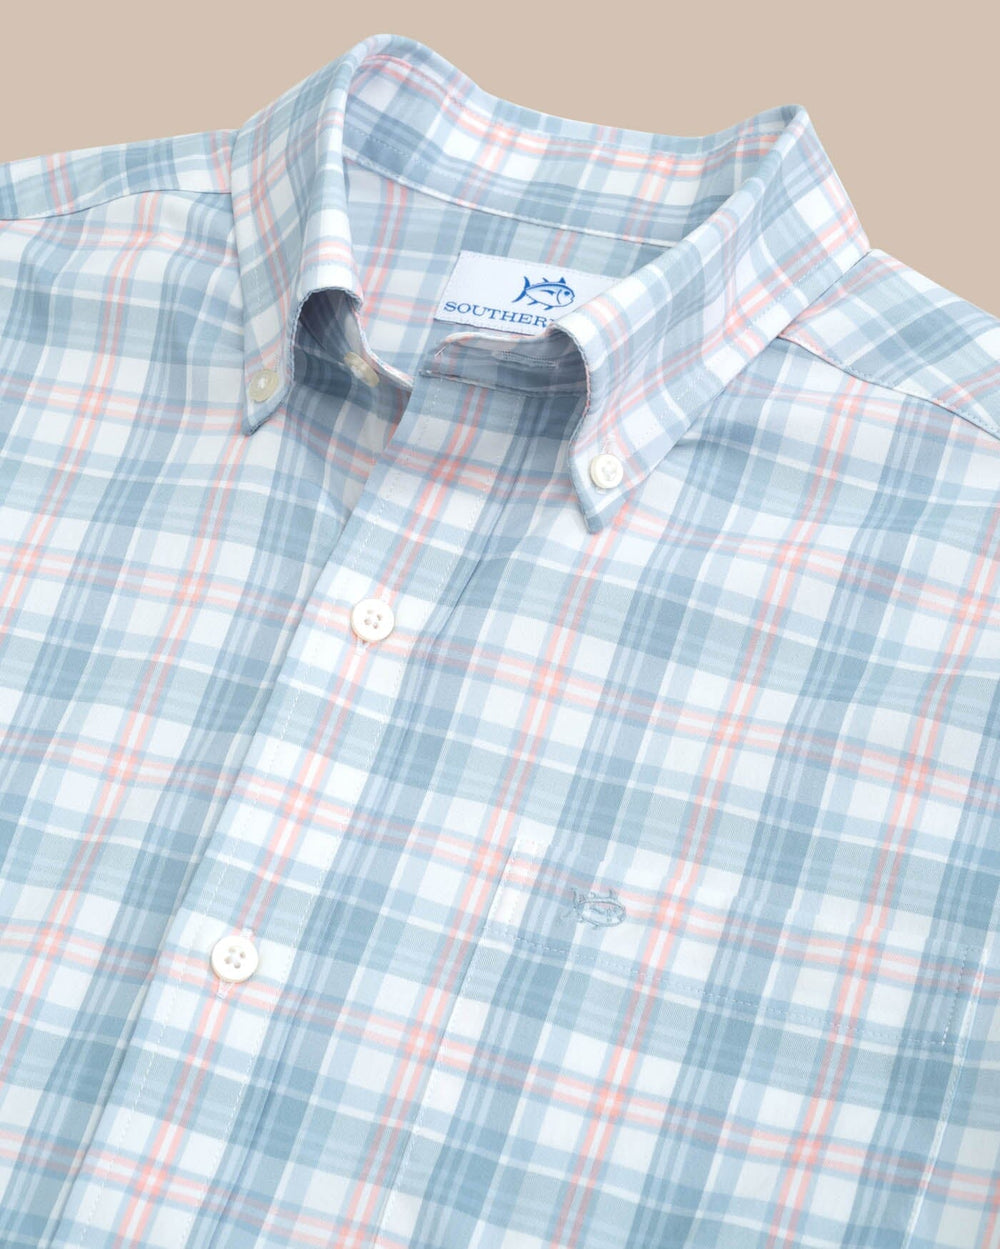 The detail view of the Southern Tide Intercoastal West End Plaid Long Sleeve Sport Shirt by Southern Tide - Subdued Blue